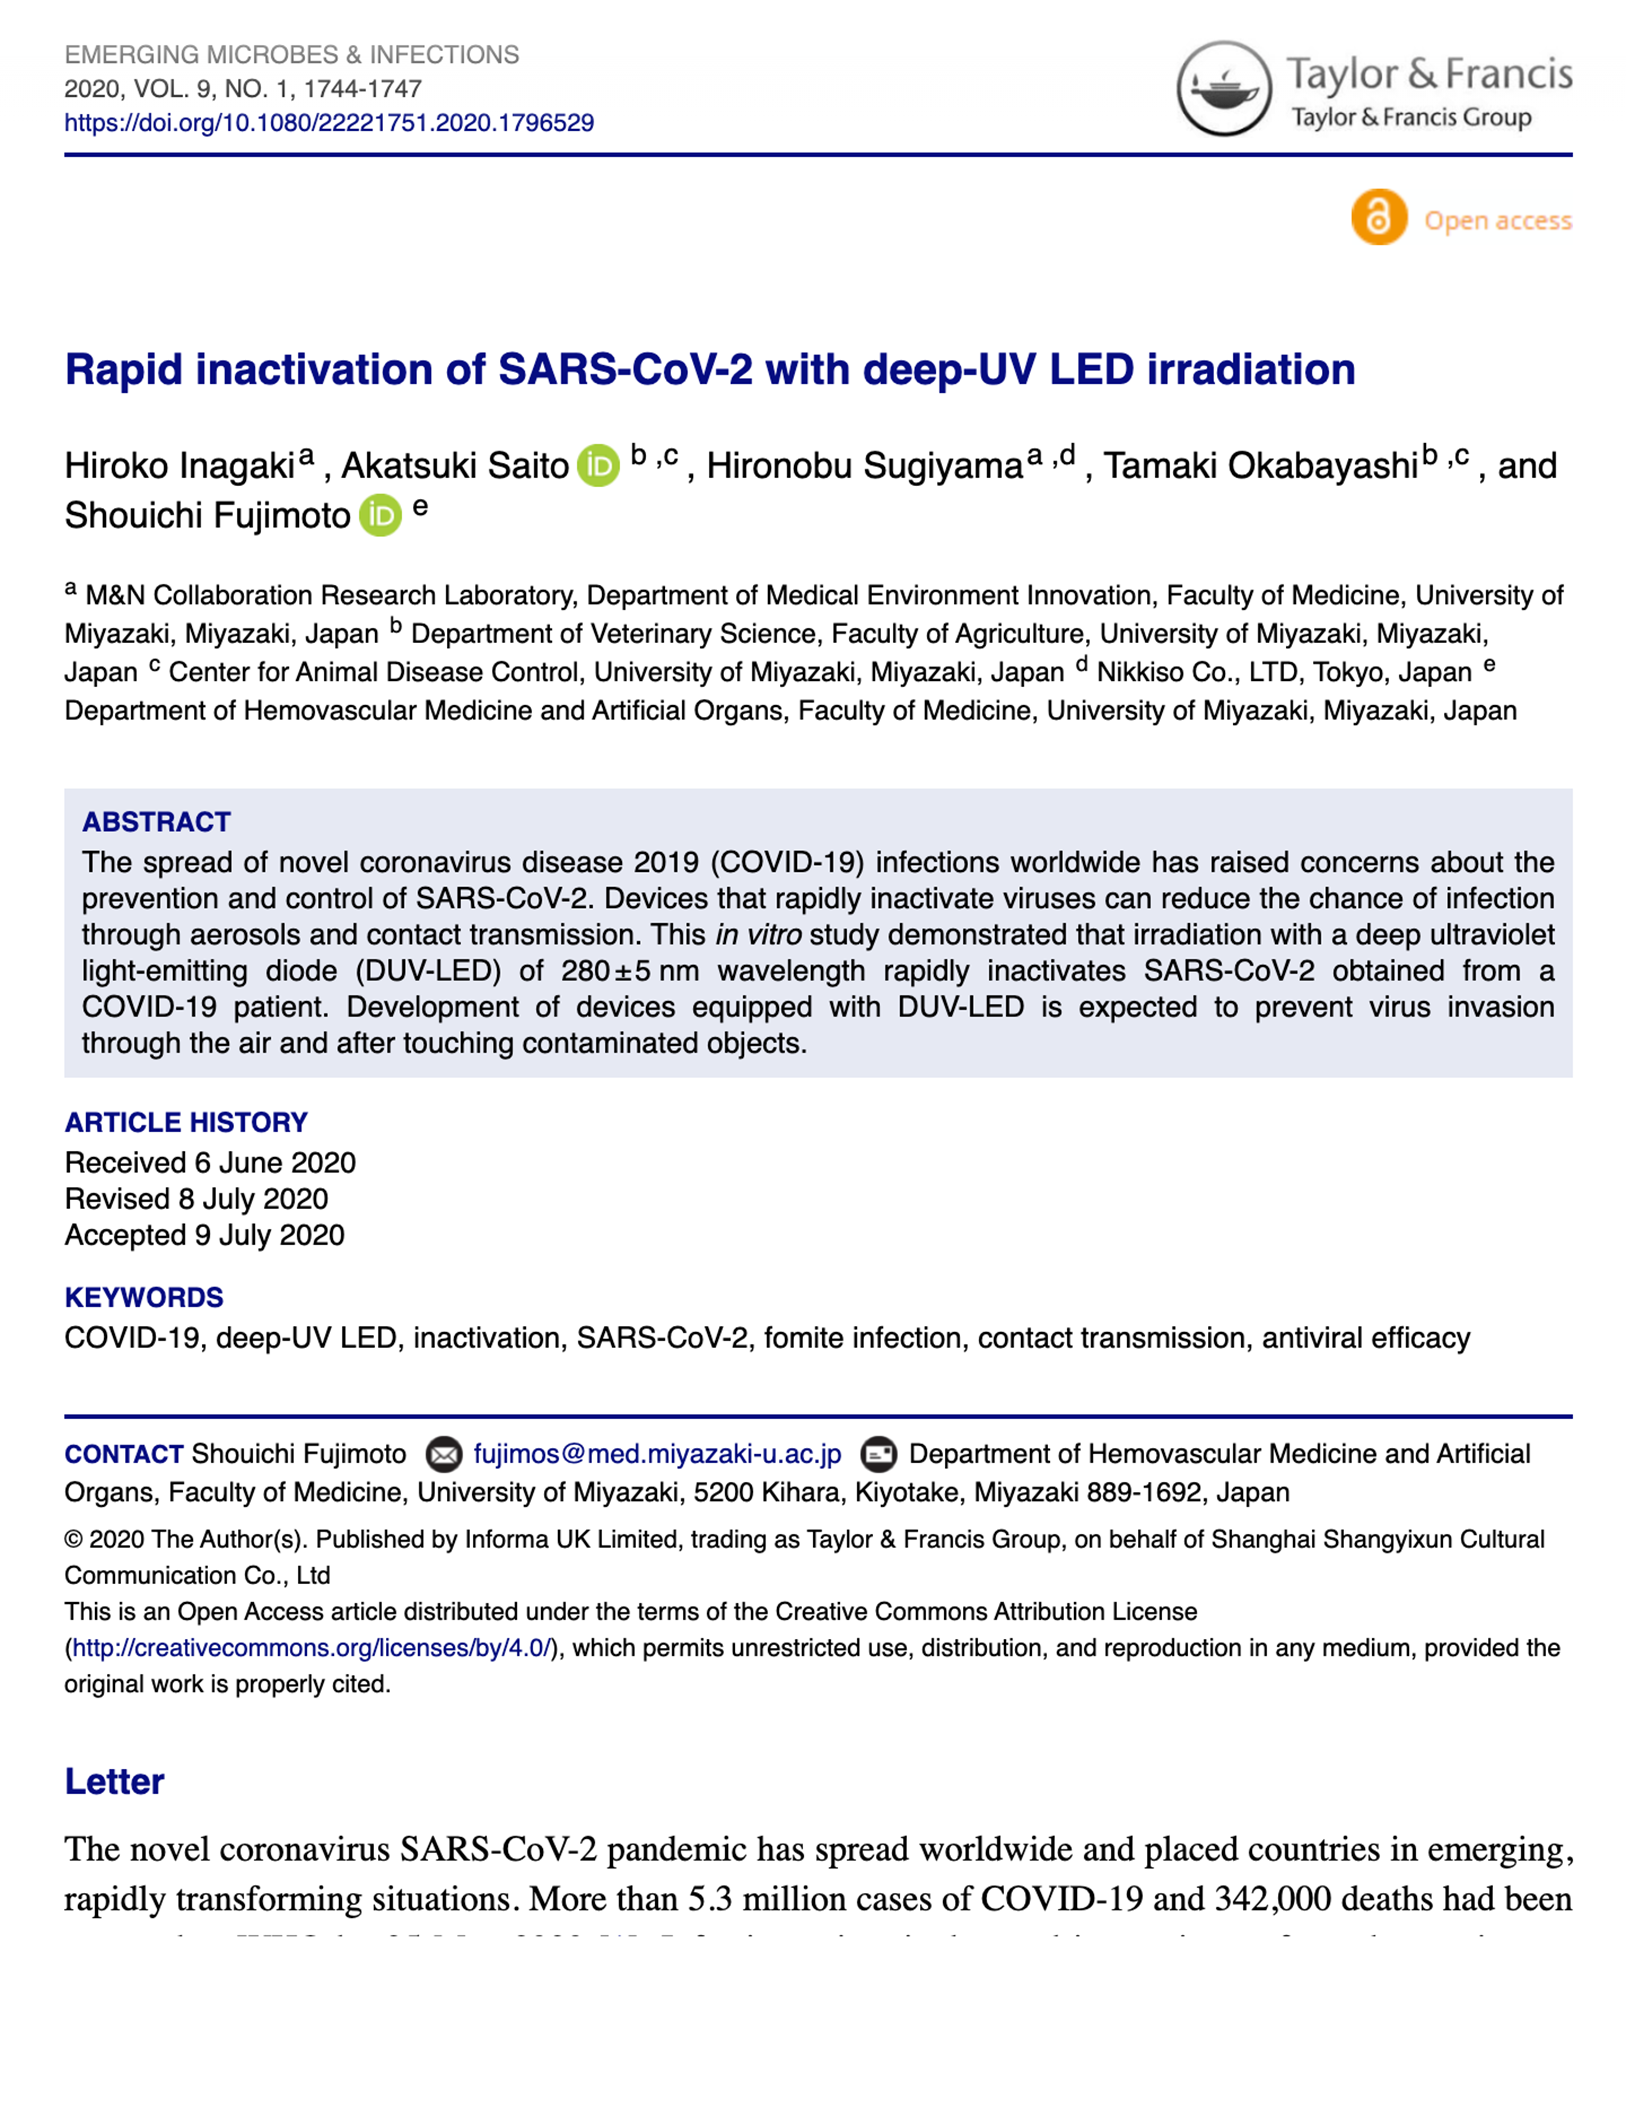 Rapid inactivation of SARS CoV 2 with deep UV LED irradiation